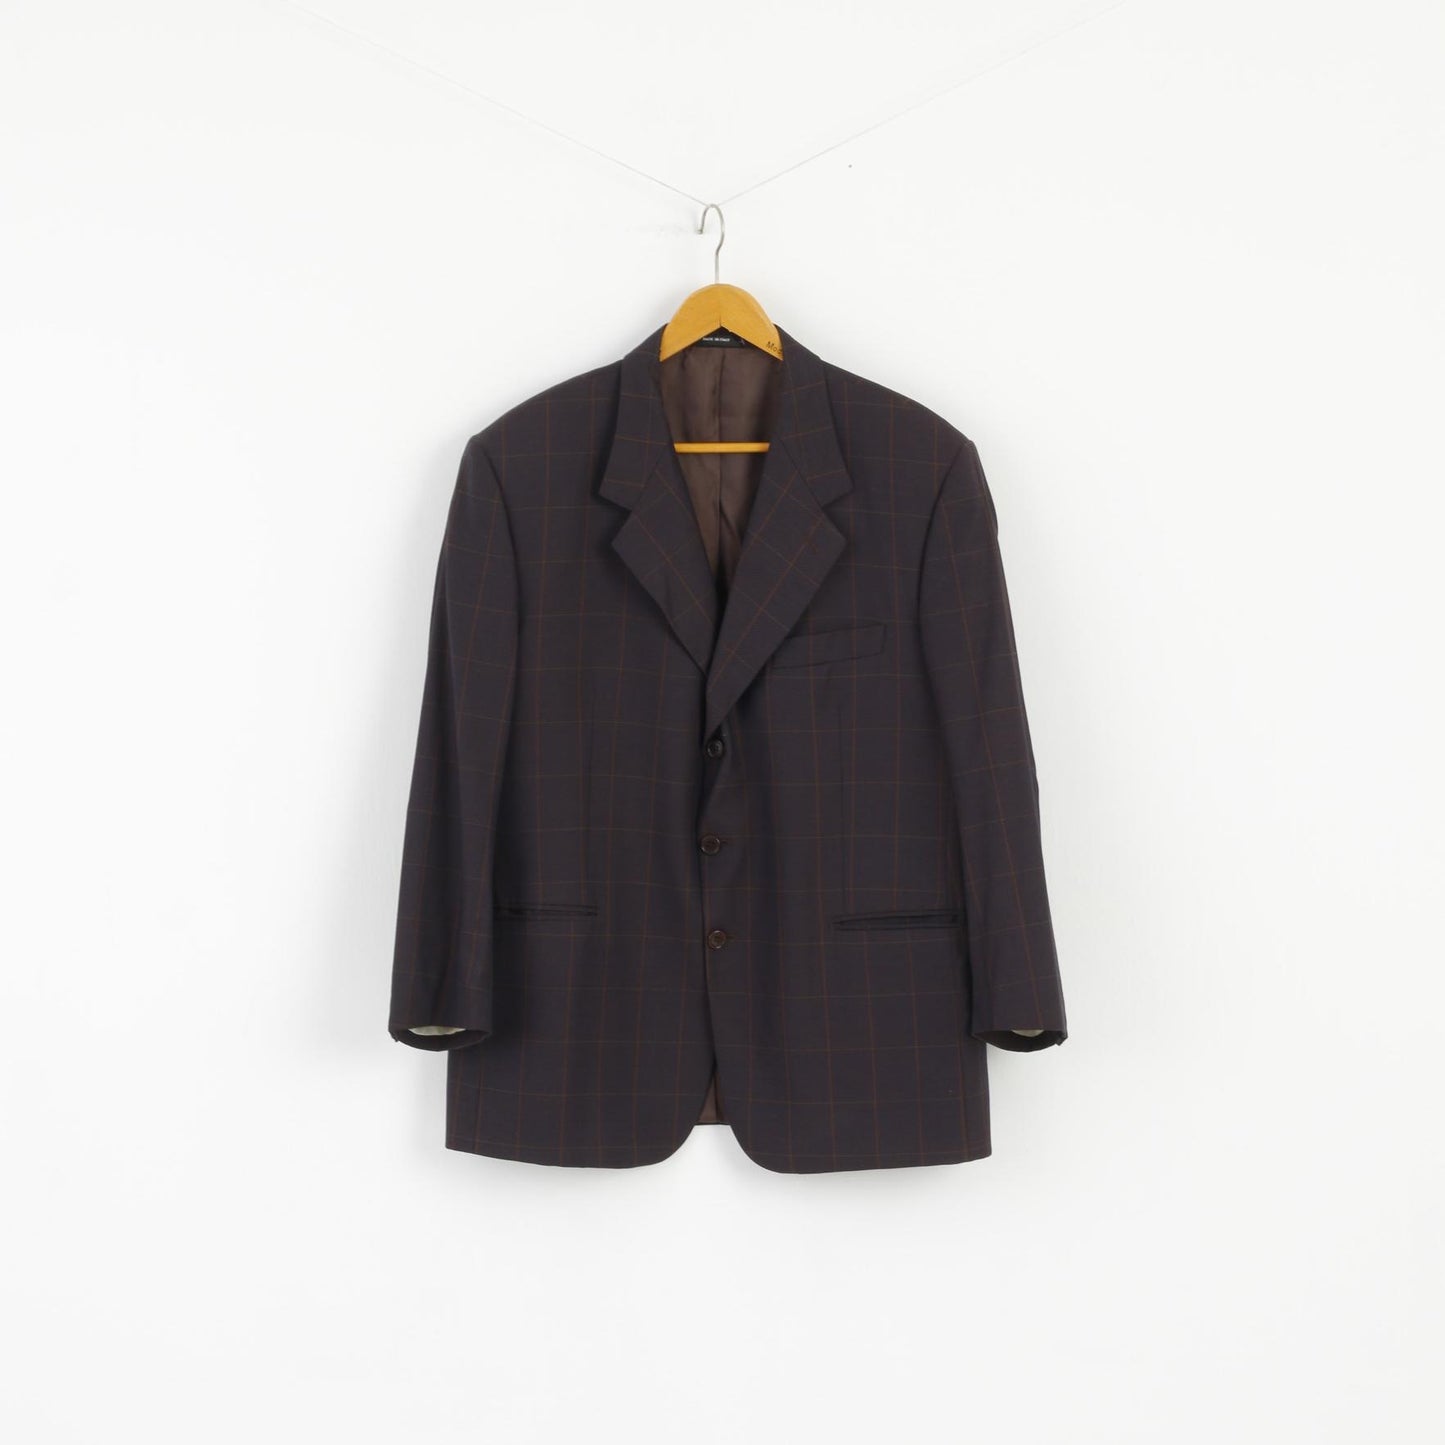 Emilio Rizzi Ferrini Men 54 Blazer Brown Navy Check Wool Single Breasted Made in Italy Jacket